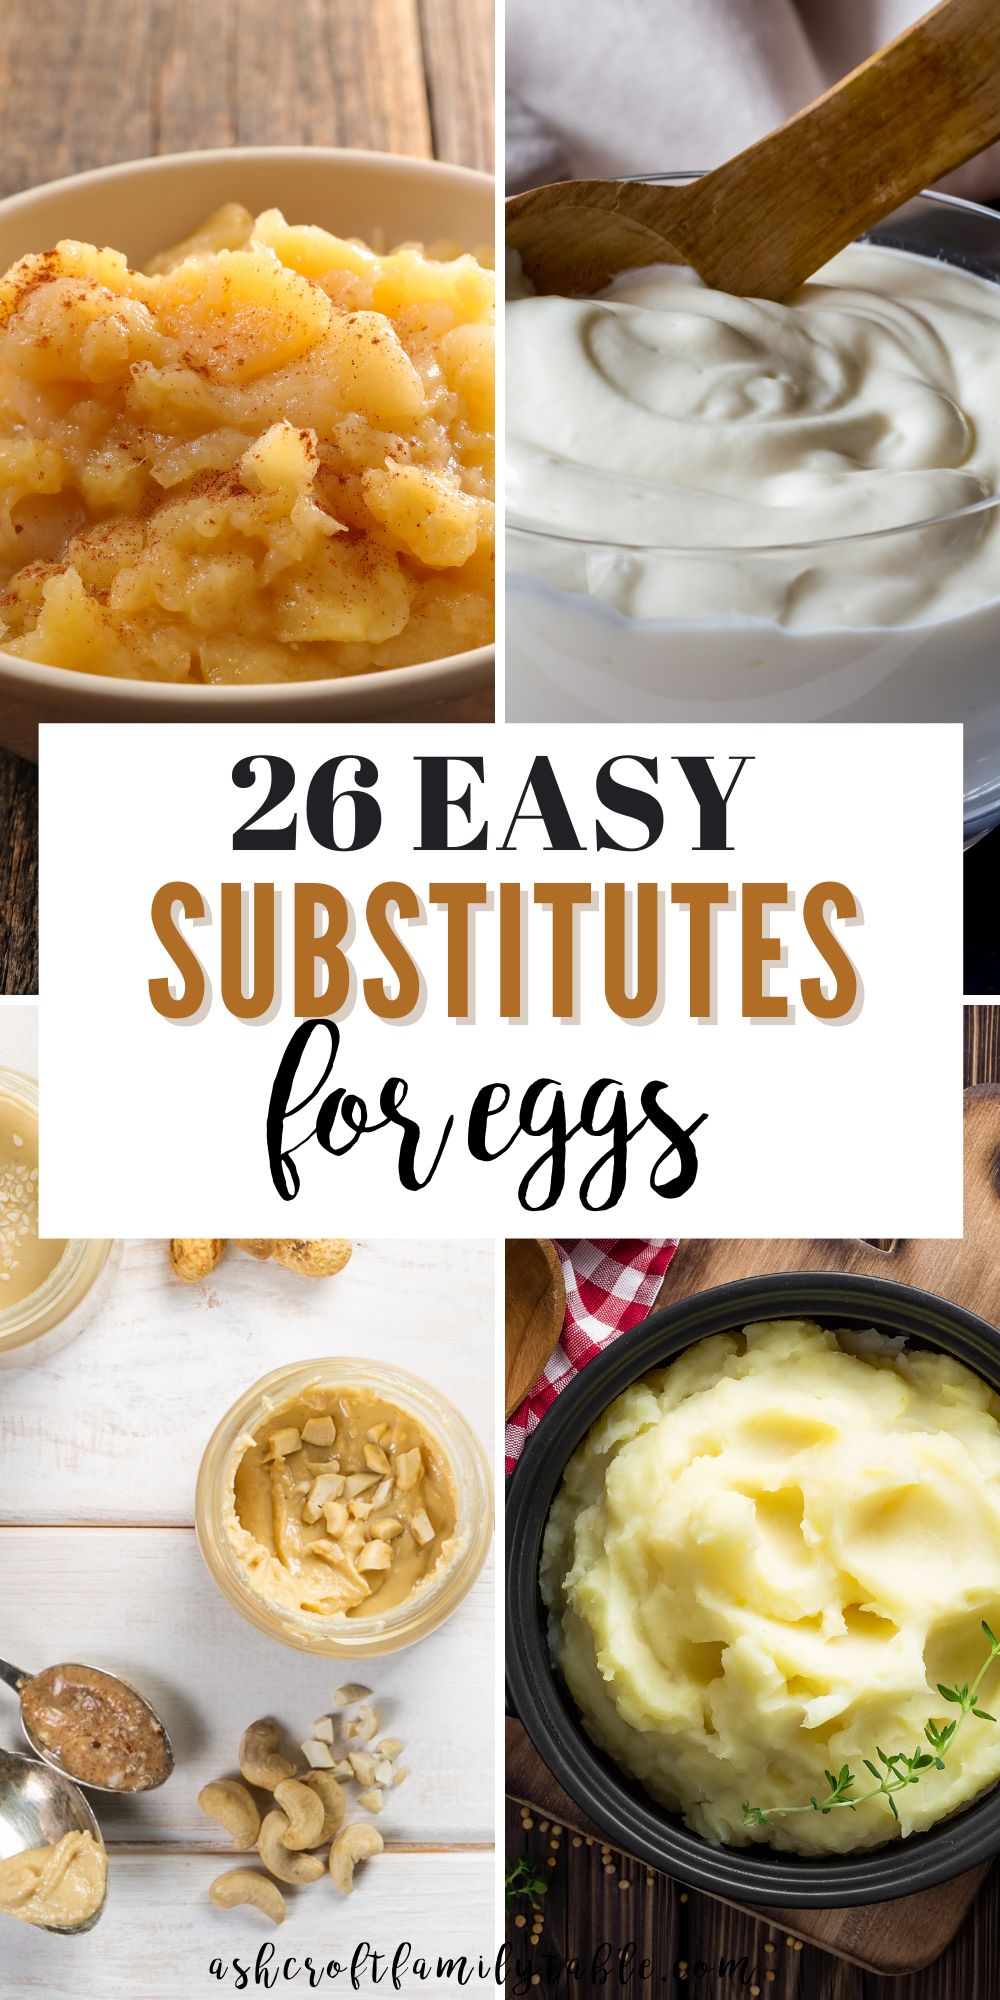 Pinterest graphic with text and collage of ingredients used to substitute for eggs.